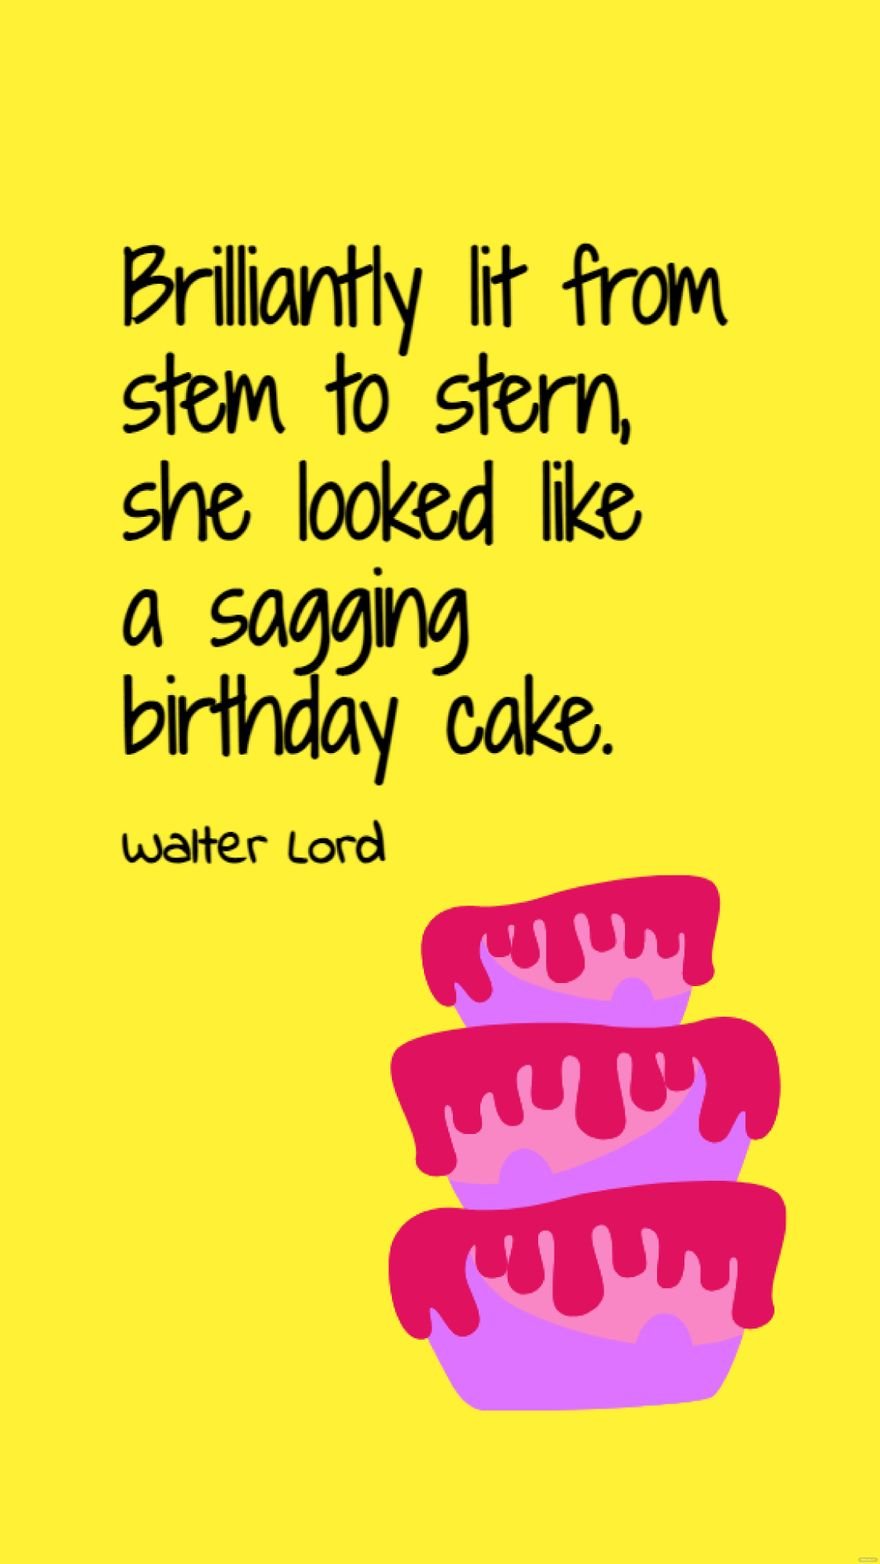 Free Walter Lord - Brilliantly lit from stem to stern, she looked like a sagging birthday cake.